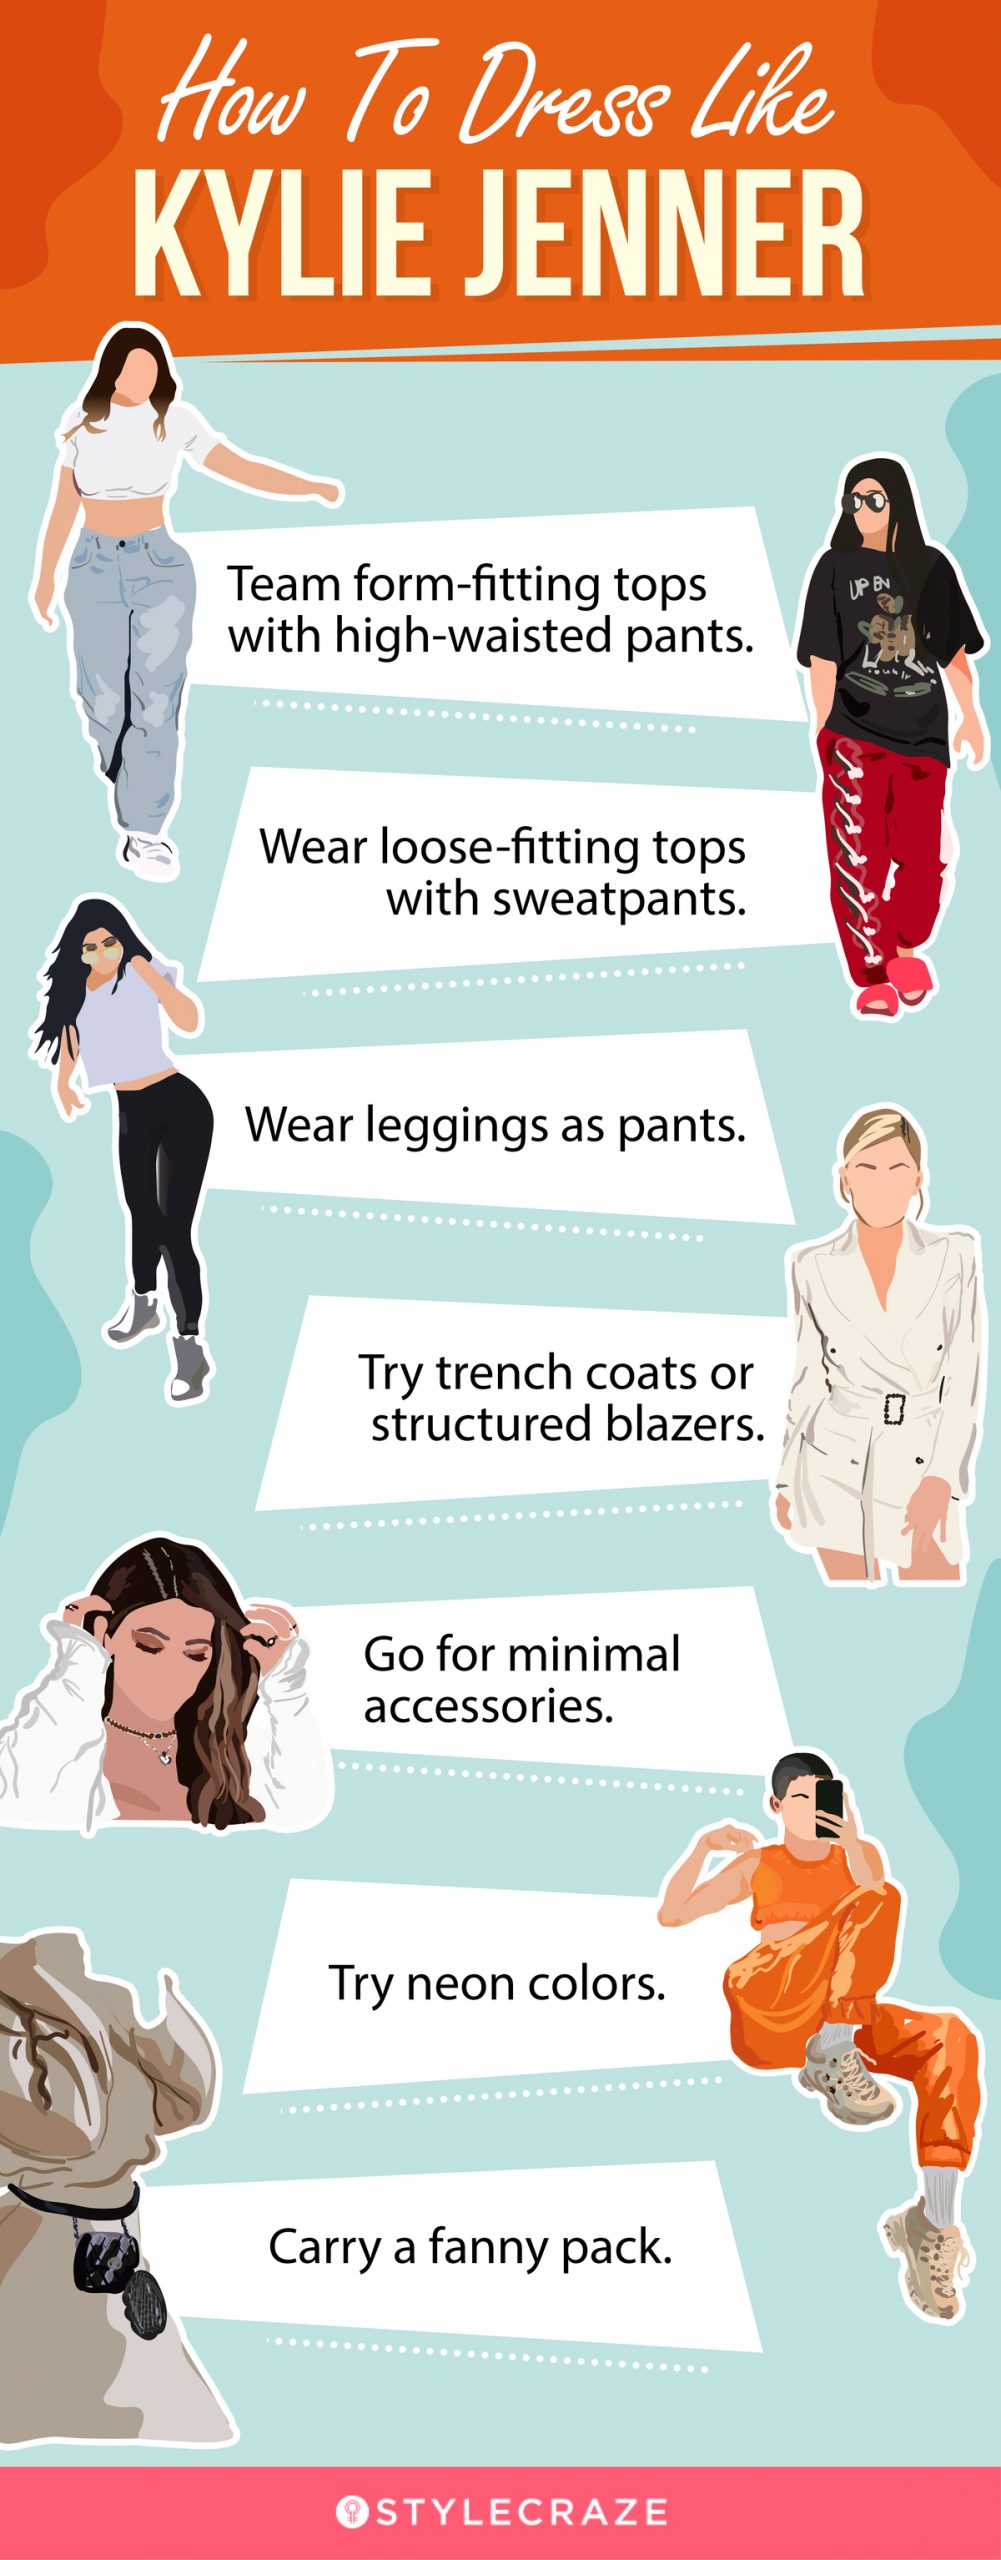 how to dress like kylie jenner (infographic)